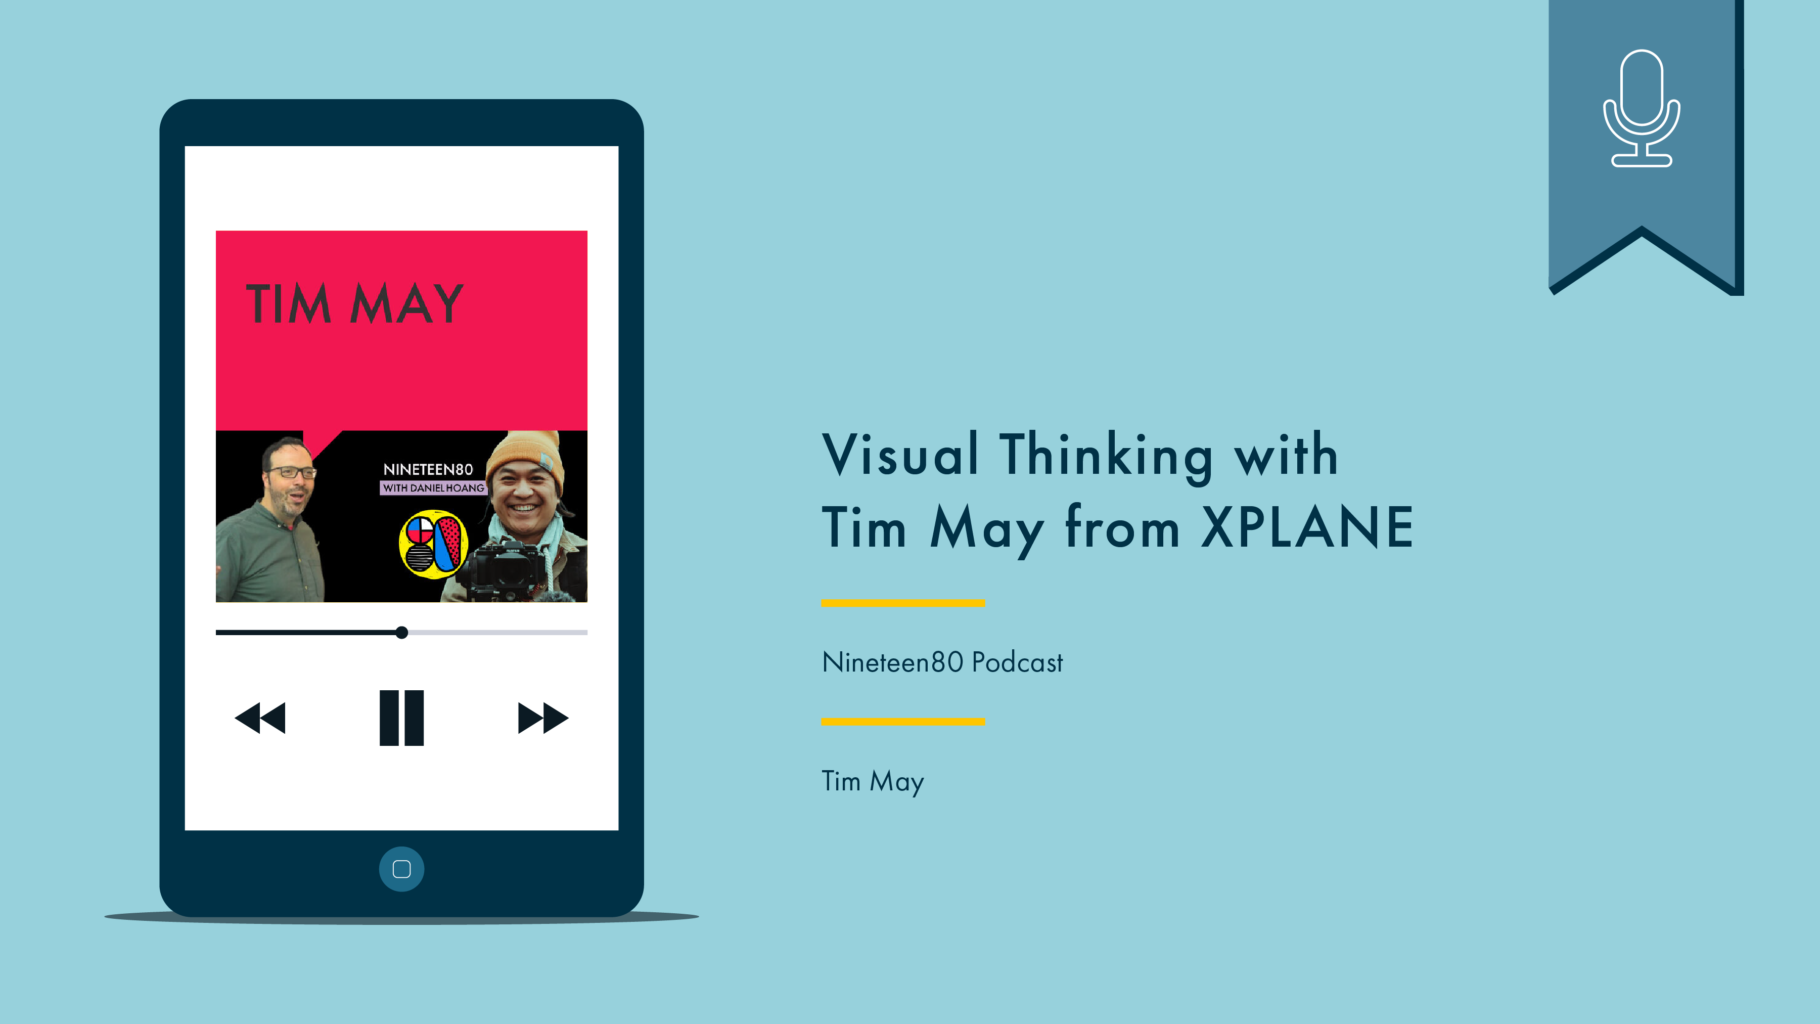 Phone with podcast artwork on the left. On the right reads “Visual Thinking with Tim May from XPLANE, Nineteen80 Podcast, Tim May”. Above is a blue flag with a white icon denoting that this is a podcast.